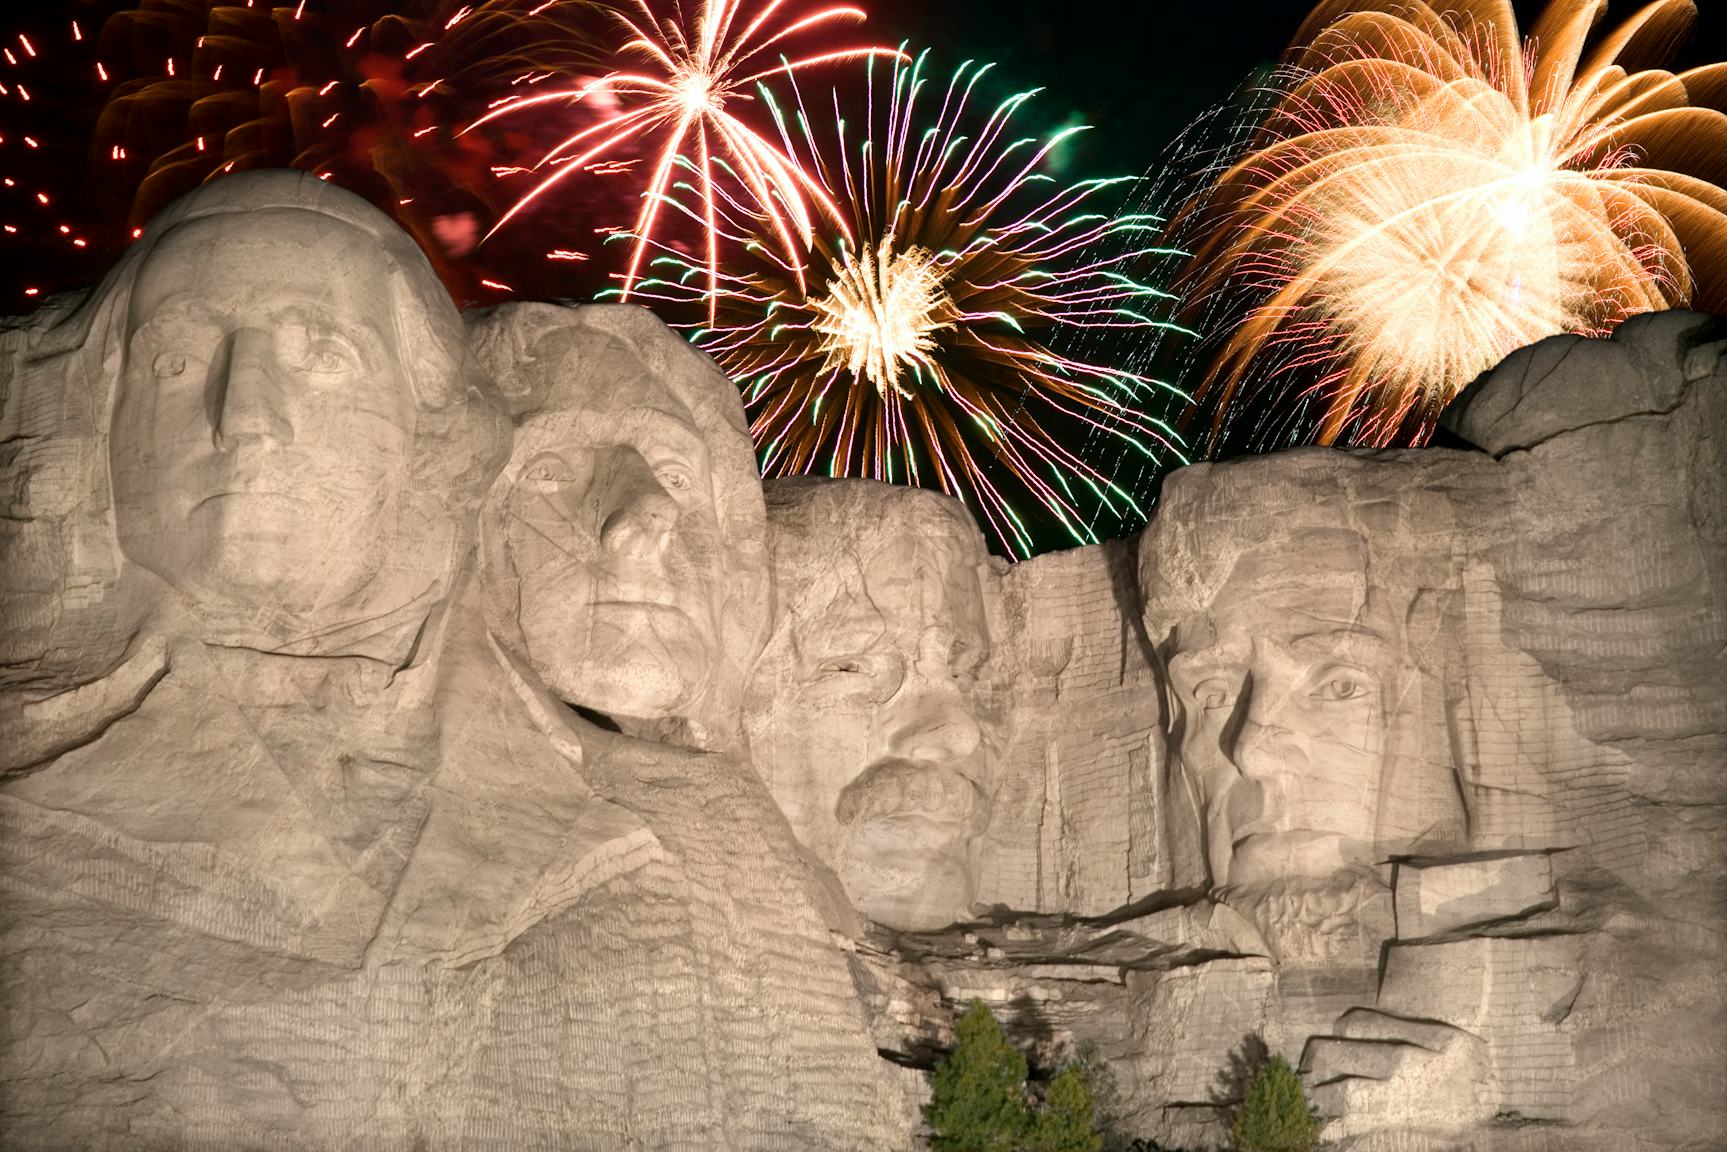 Trump's fireworks party at Mount Rushmore is stupid in so many ways